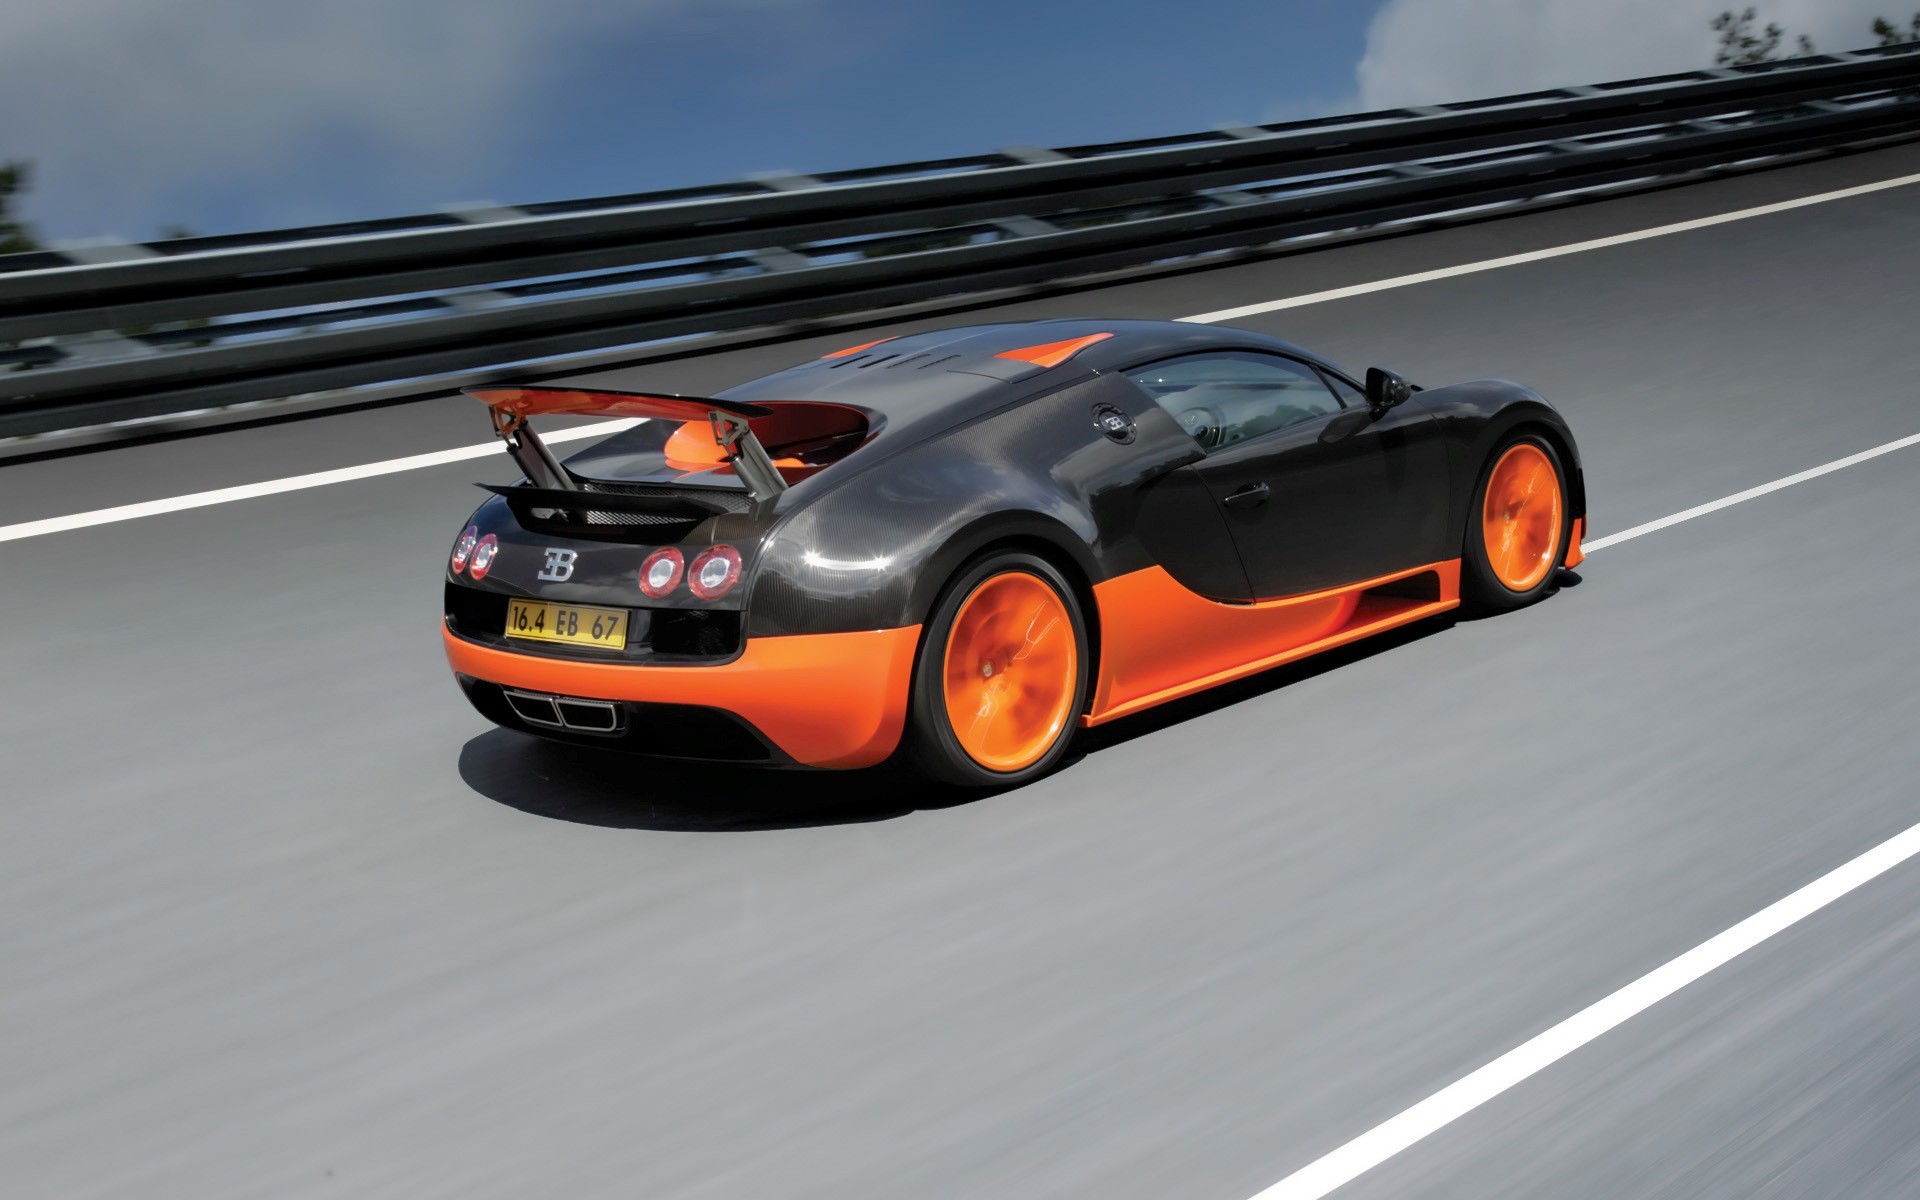 General 1920x1200 Bugatti Veyron 16.4 Super Sport Bugatti Veyron Super Sport Bugatti black cars orange cars vehicle car racing numbers French Cars Volkswagen Group Hypercar